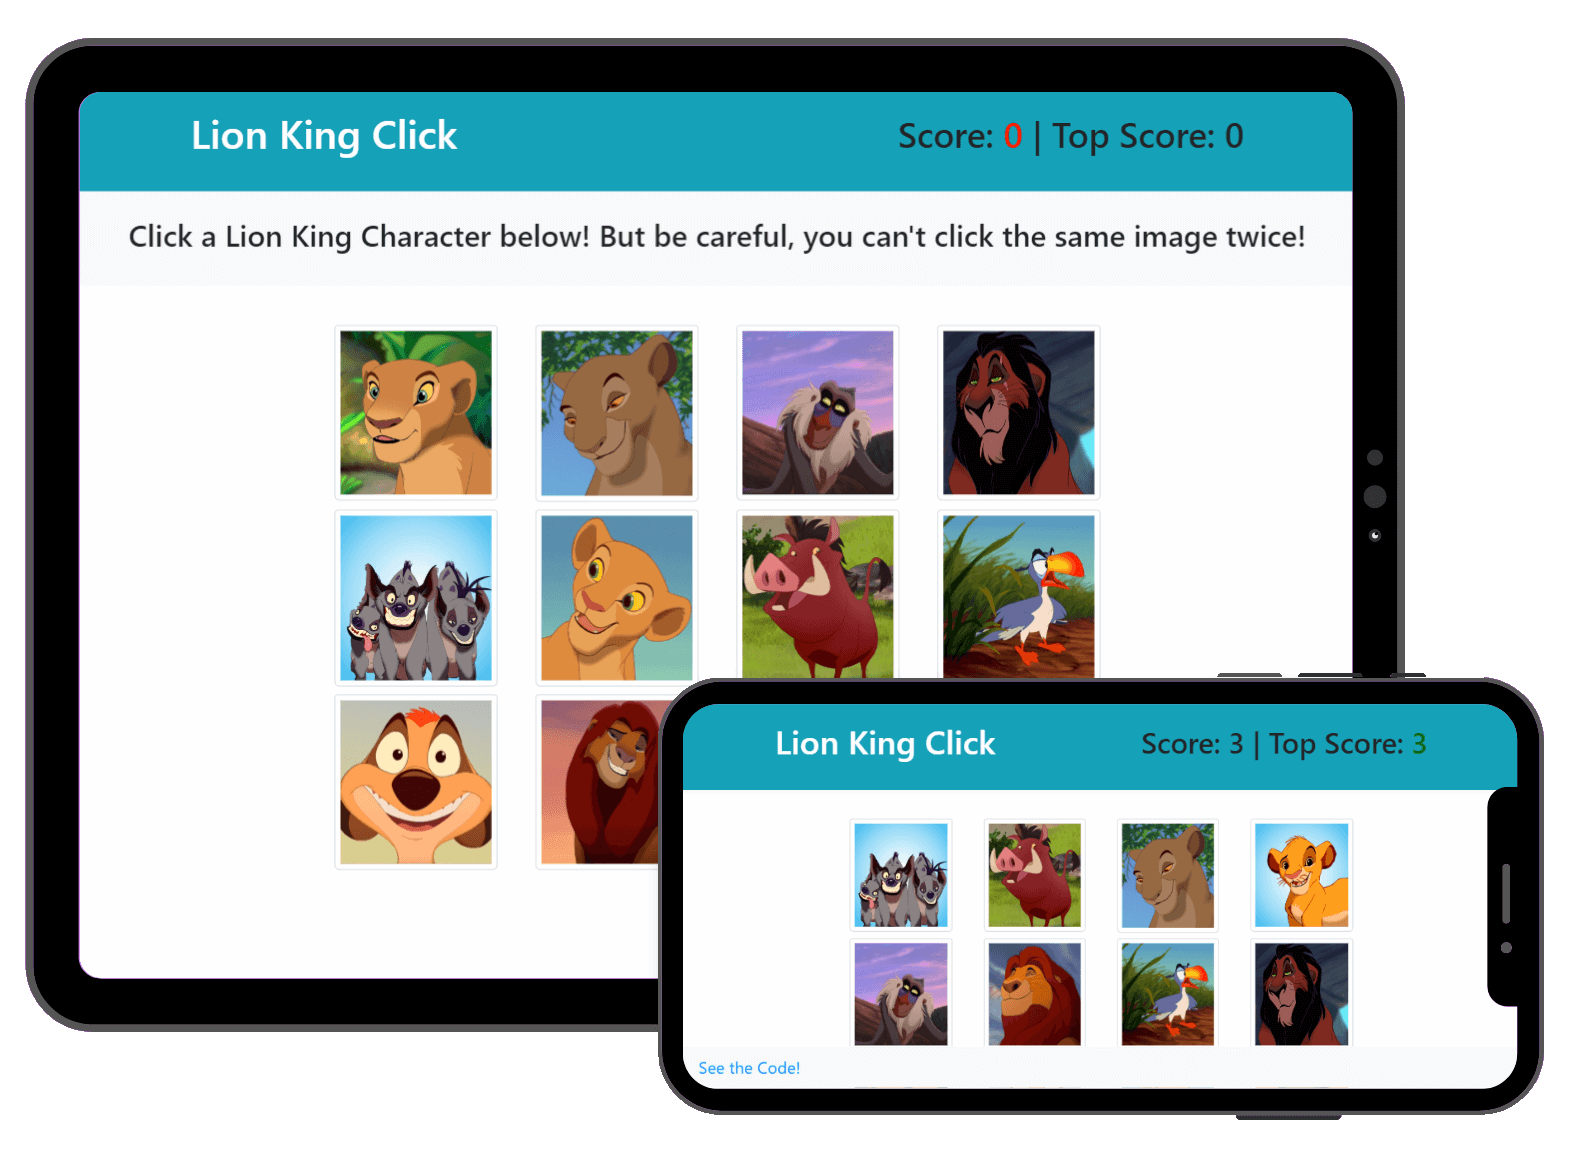 Lion King Click application displayed in ipad and iphone